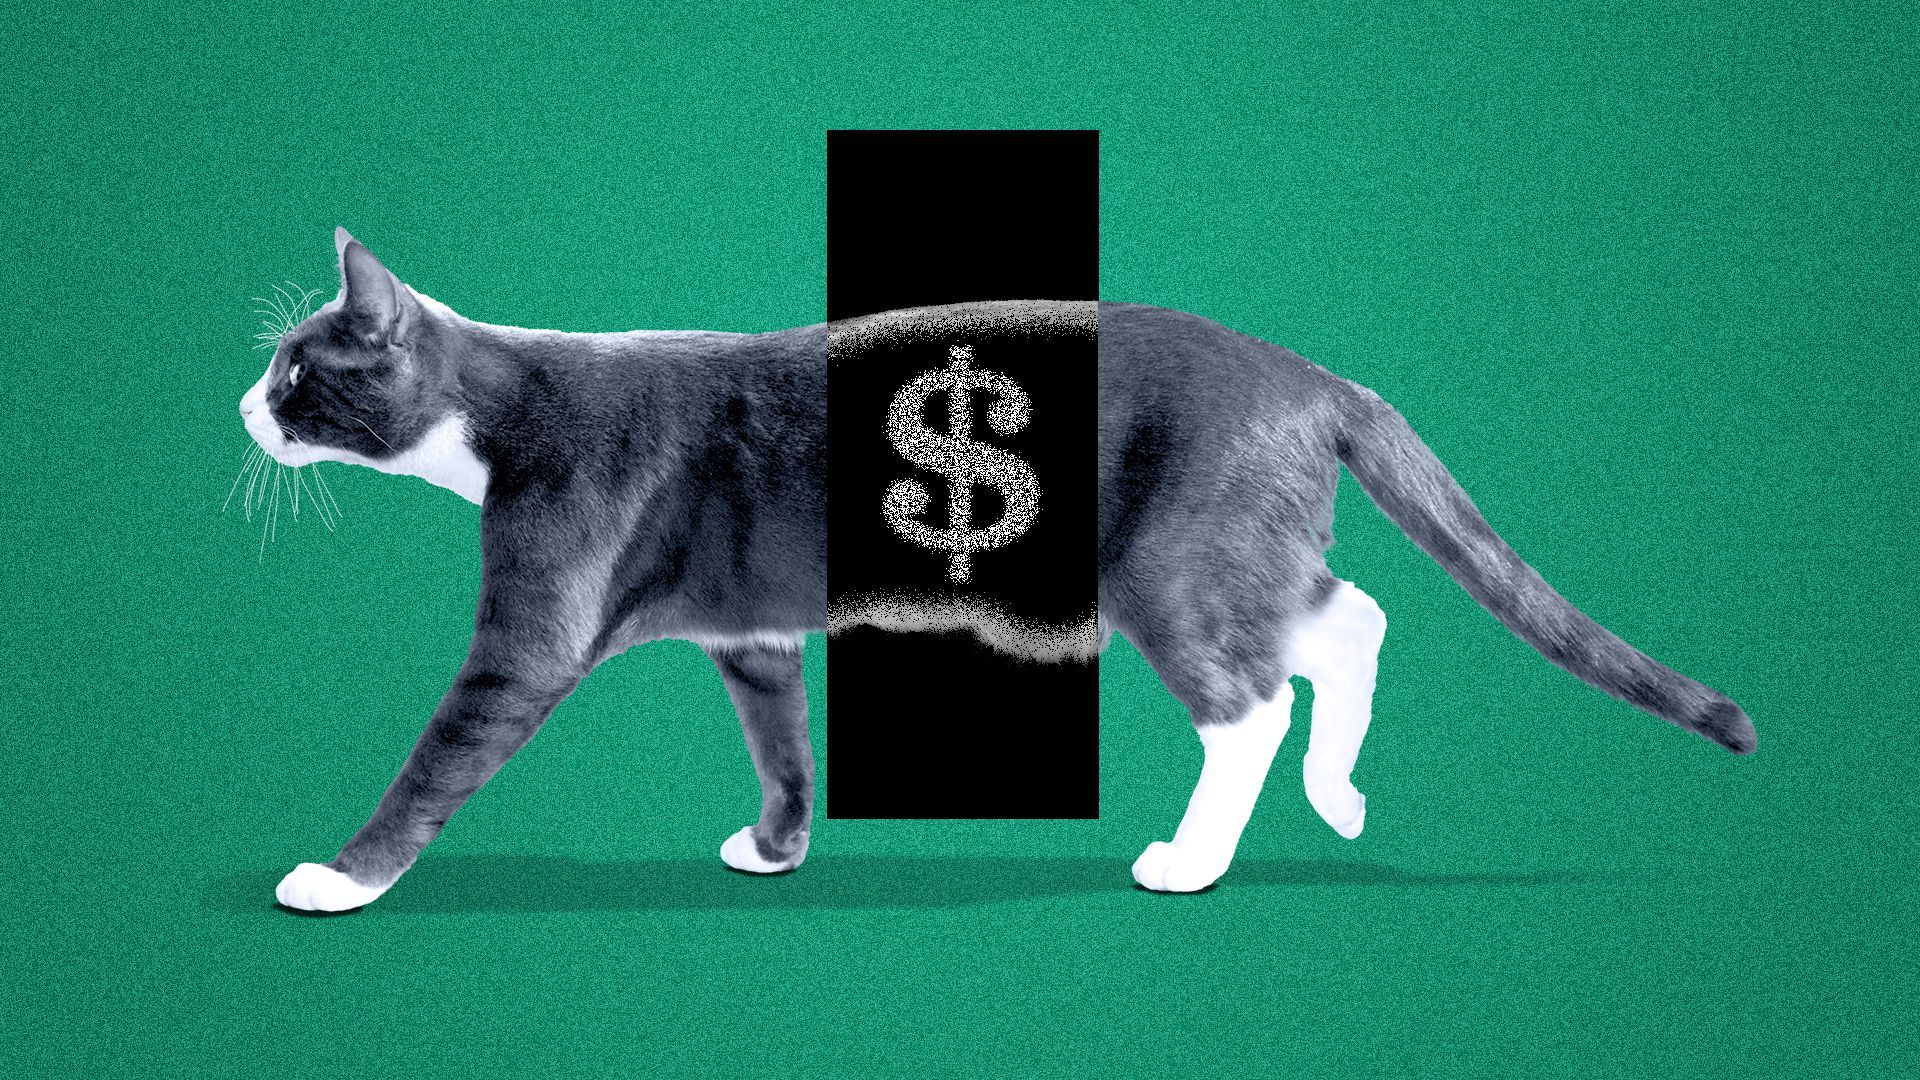 Illustration of a cat with an x-ray view of its stomach revealing a dollar sign.